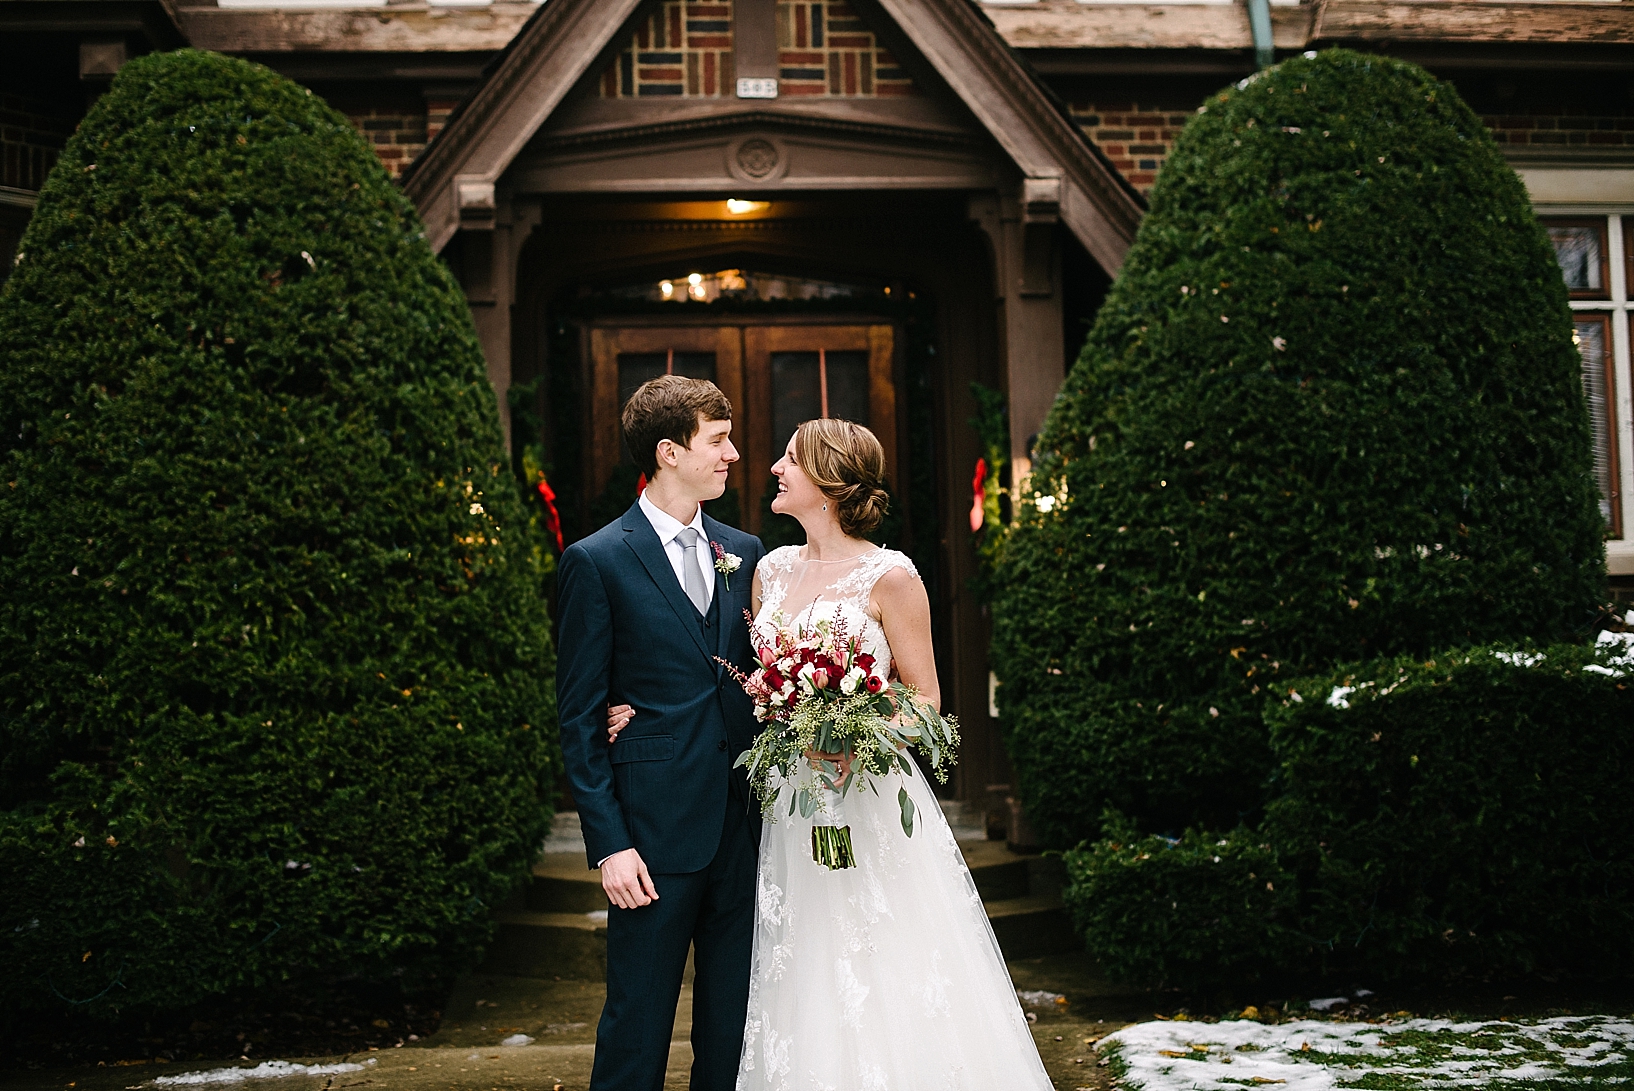 groom in navy suit and bride in lace wedding gown standing in front of chalet style bed & breakfast